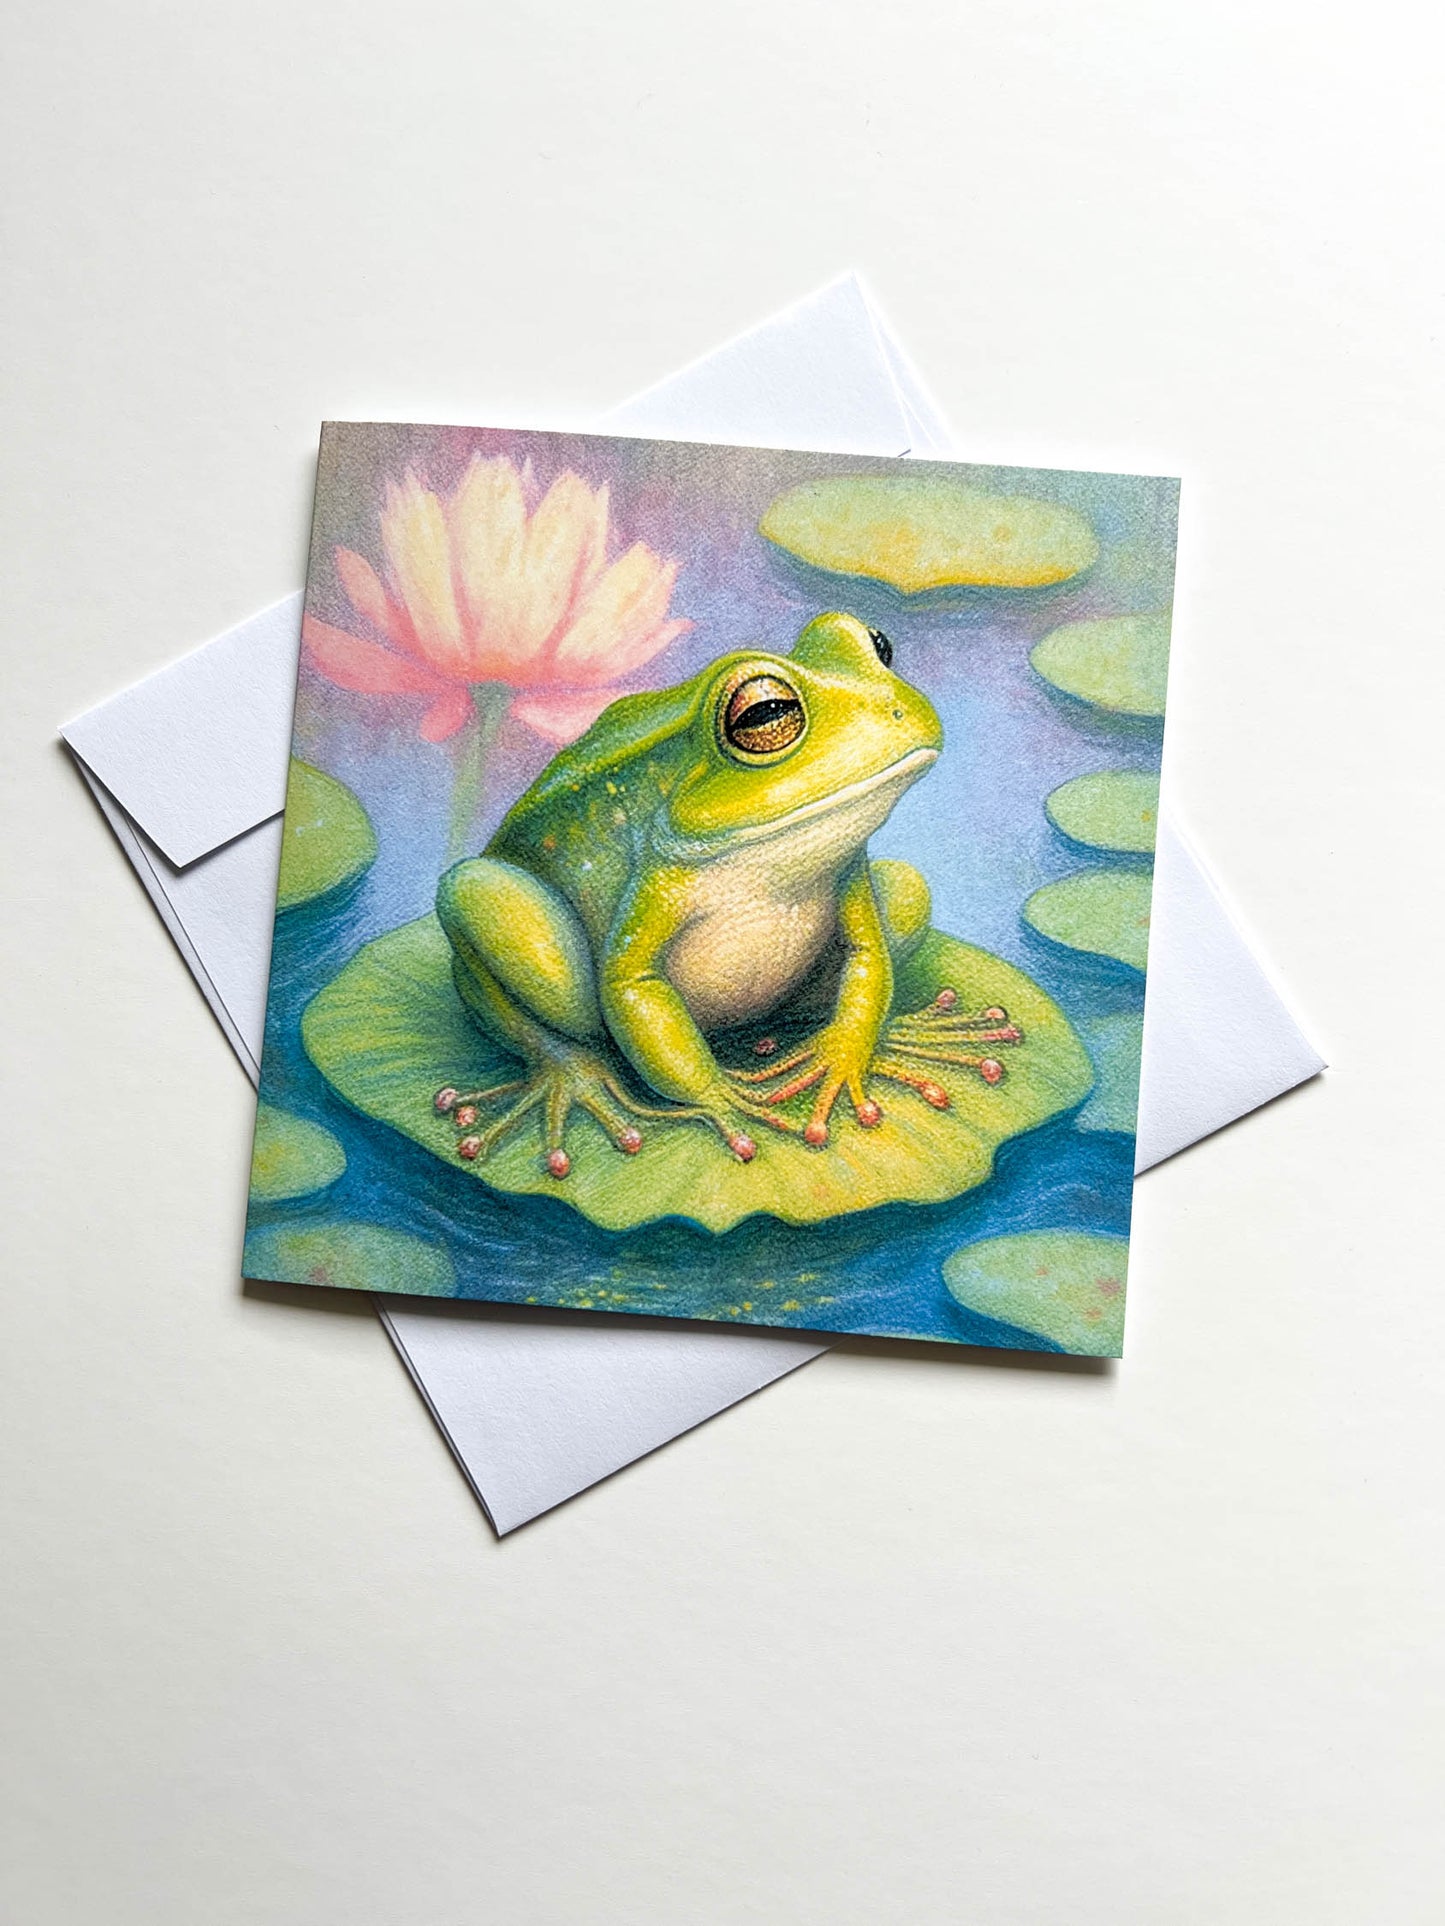 Frog on a LilyPad Greetings Card